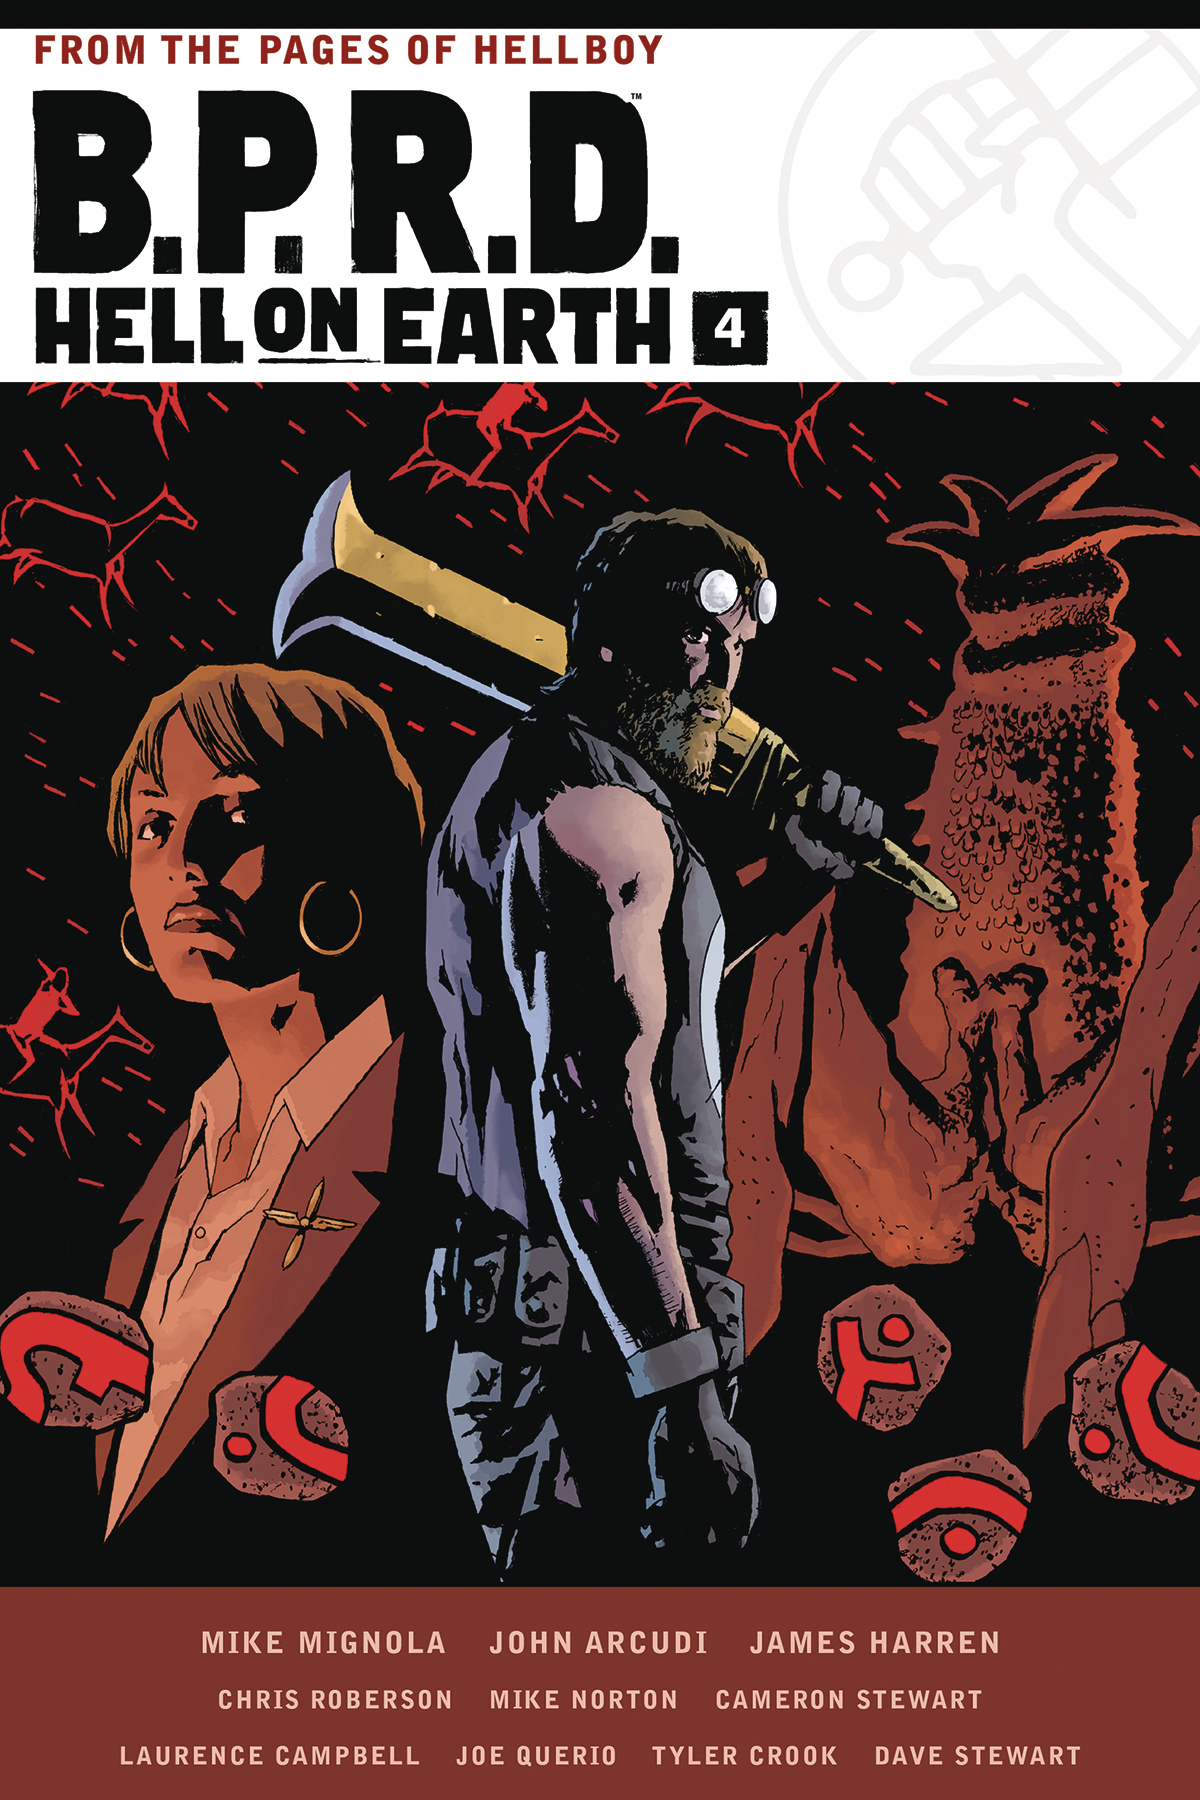 B.P.R.D. Hell on Earth Hardcover Volume 4